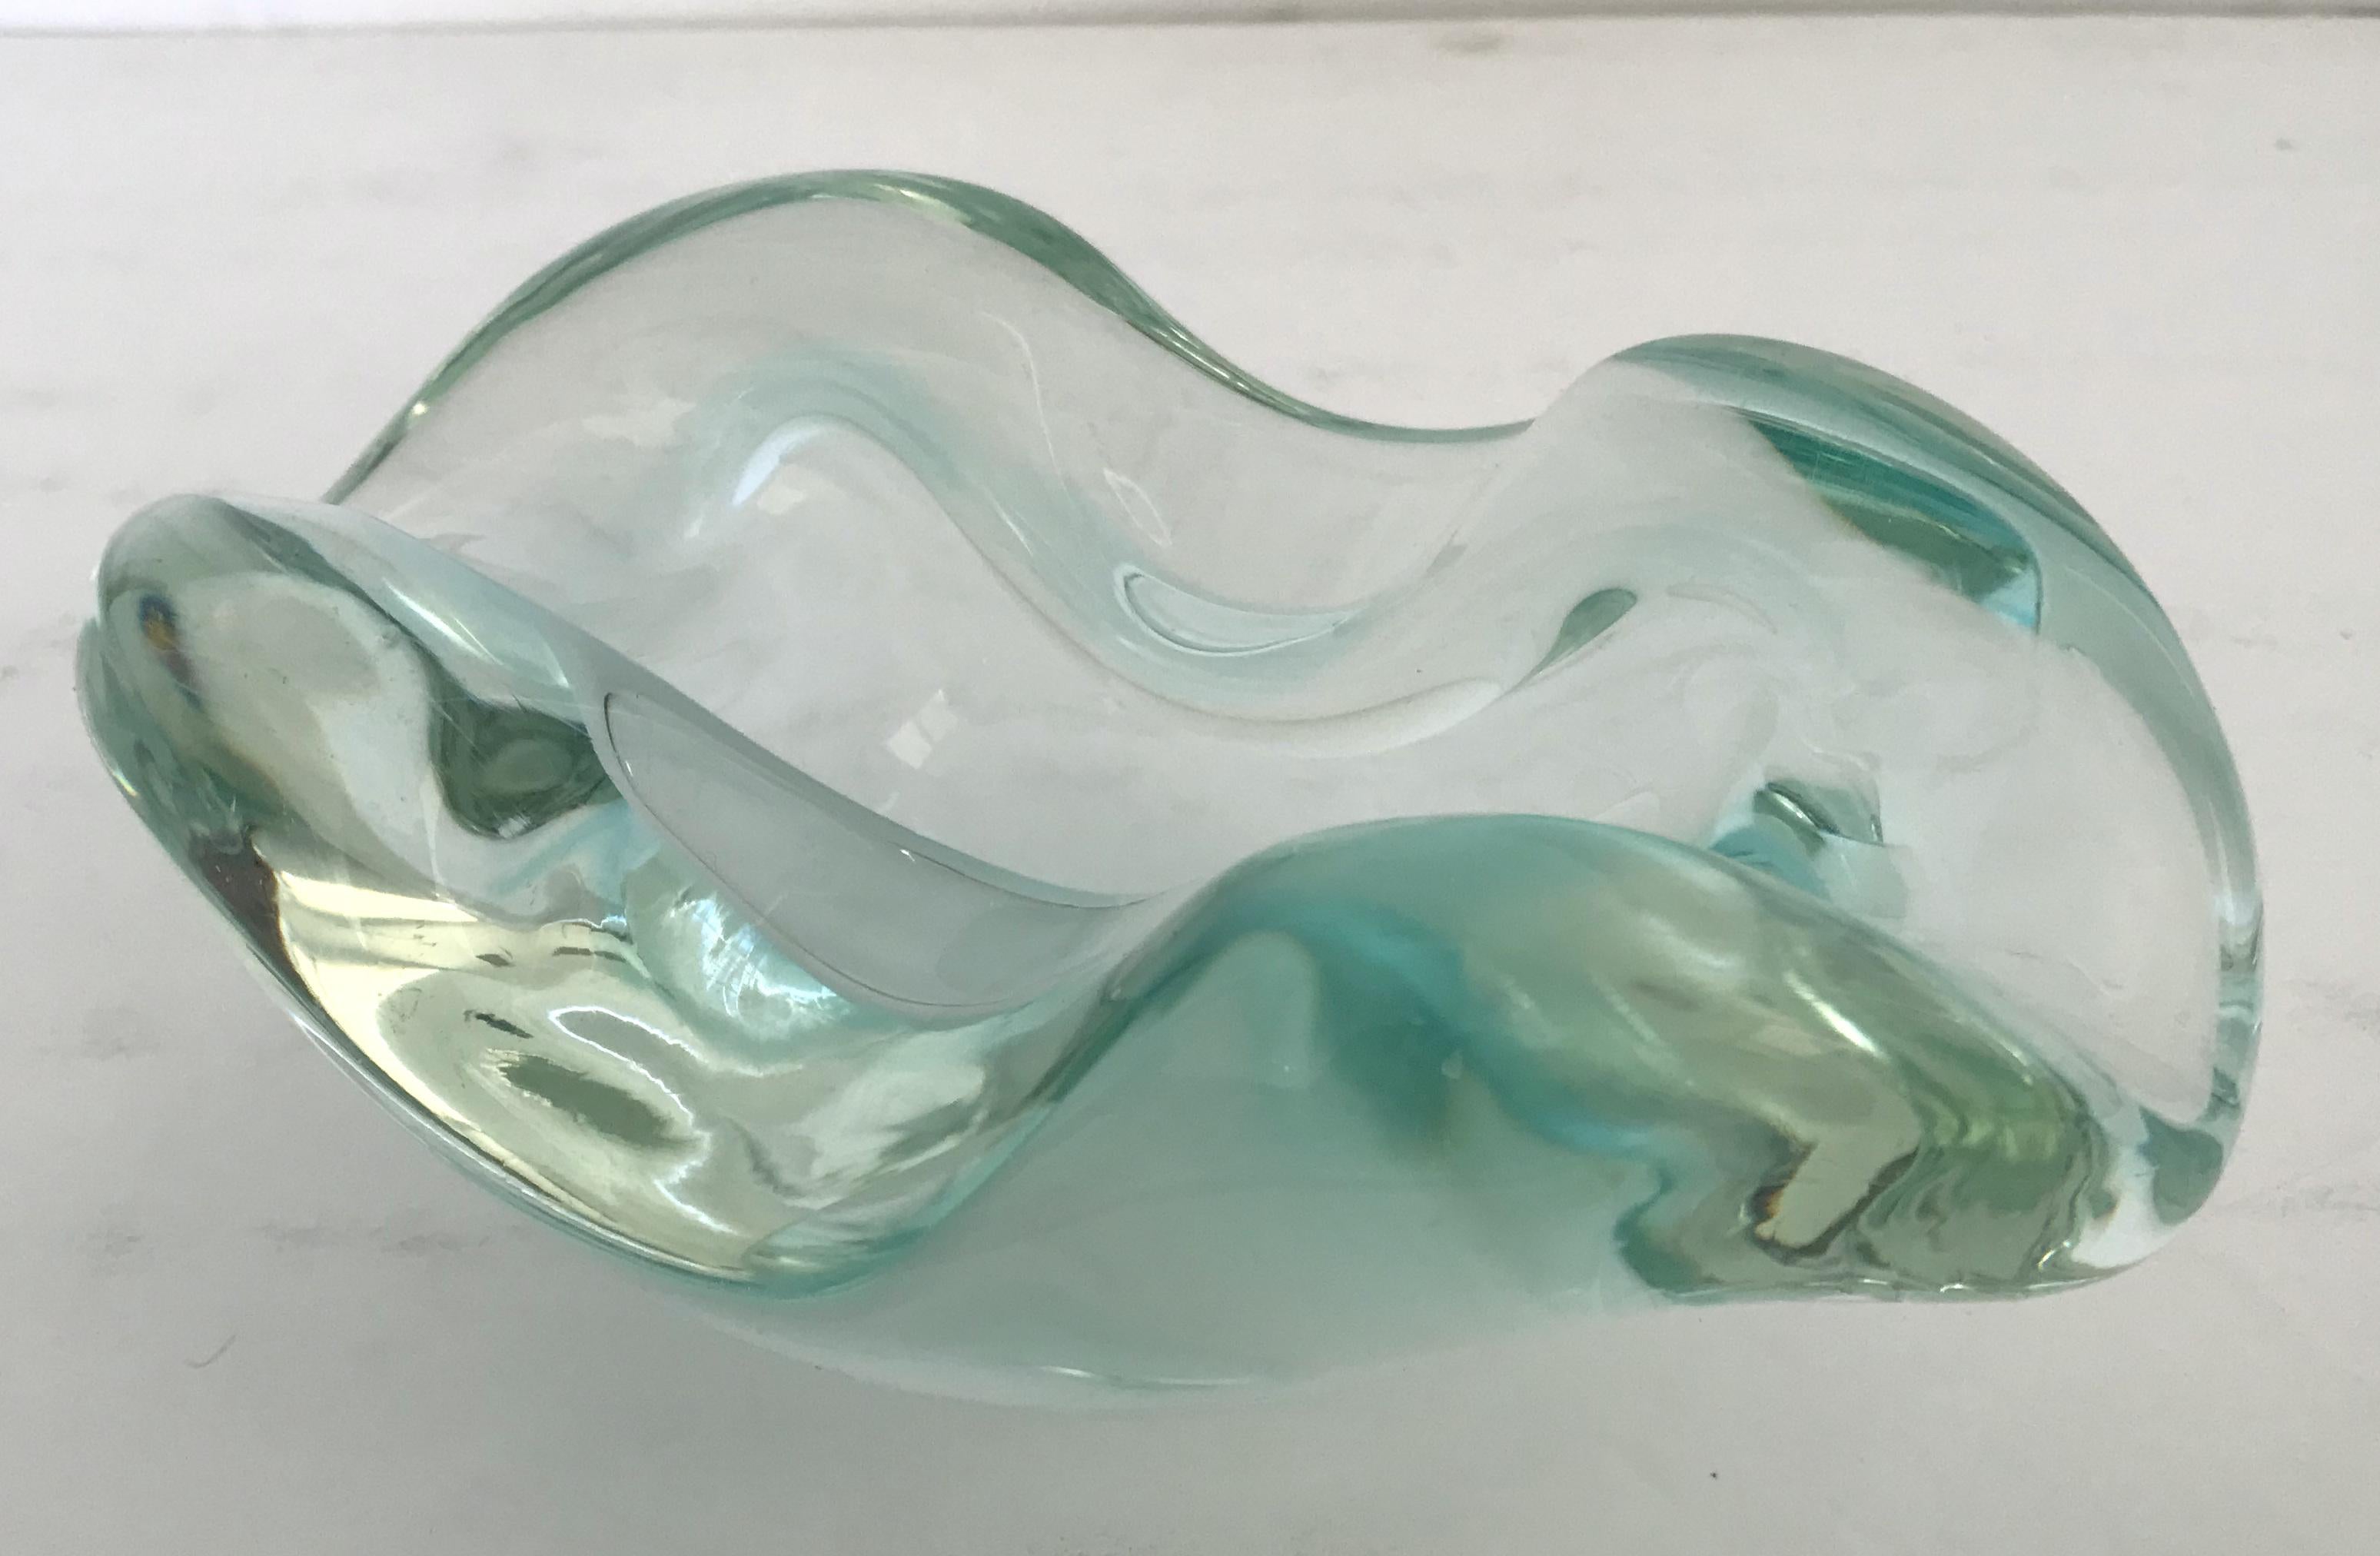 Vintage Italian midcentury clear Murano glass ashtray or bowl hand blown with beautiful curvatures / Made in Italy, circa 1960s
Measures: width 7.5 inches, depth 5 inches, height 3 inches
1 in stock in Los Angeles
Order Reference #: FABIOLTD